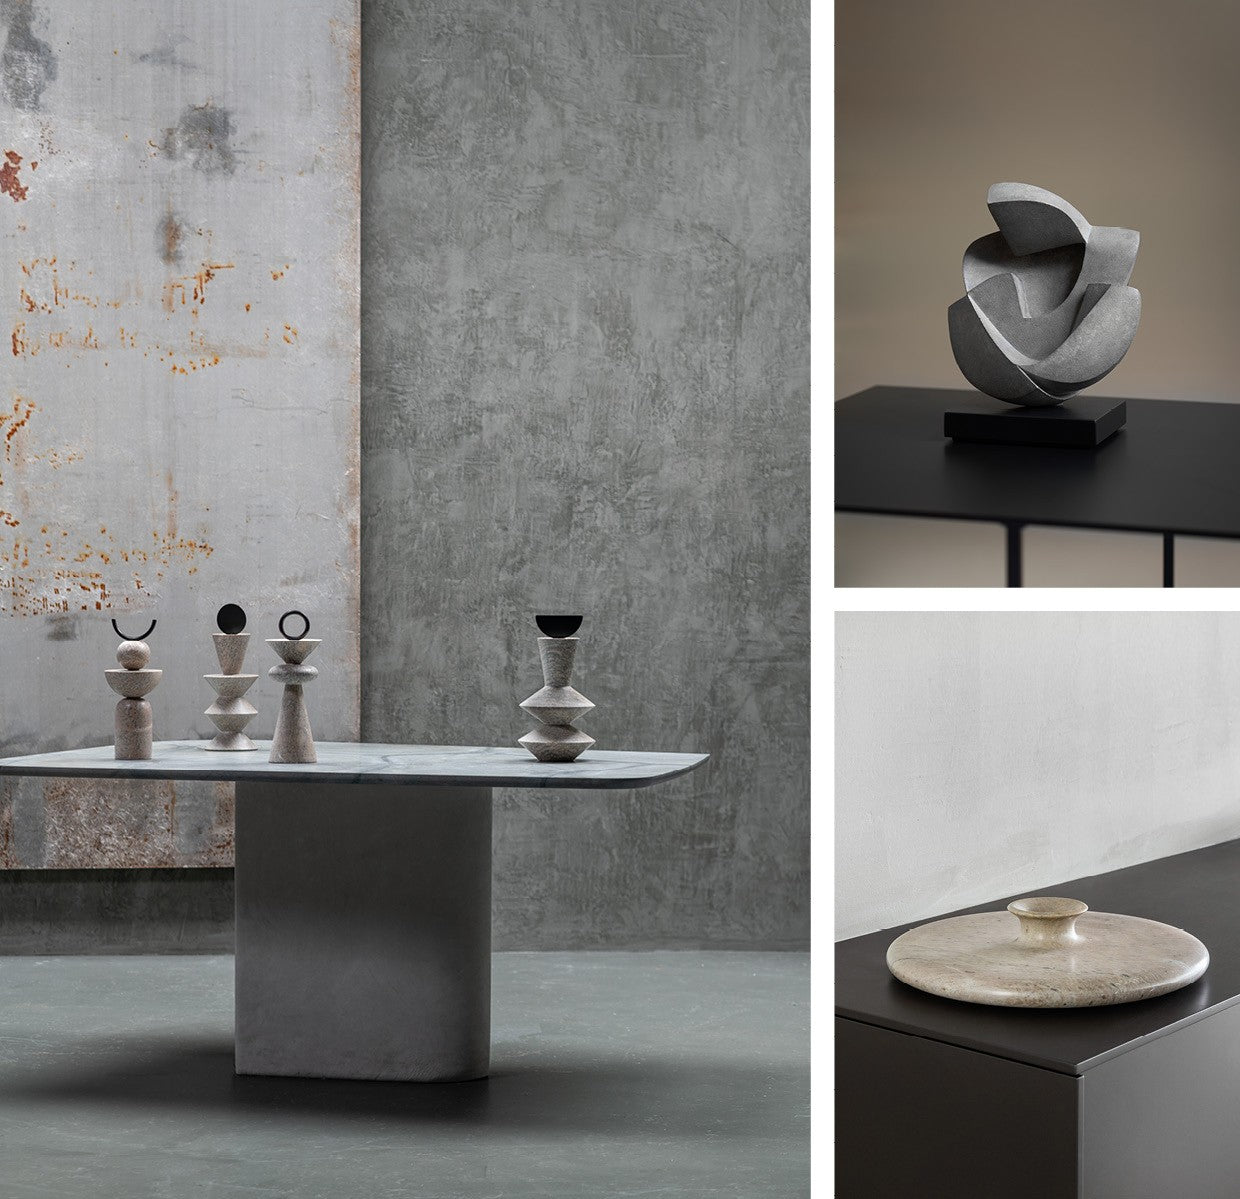 Gardeco Soap Stone, Bronze & Ceramic Art Objects in various interior settings from Spacio